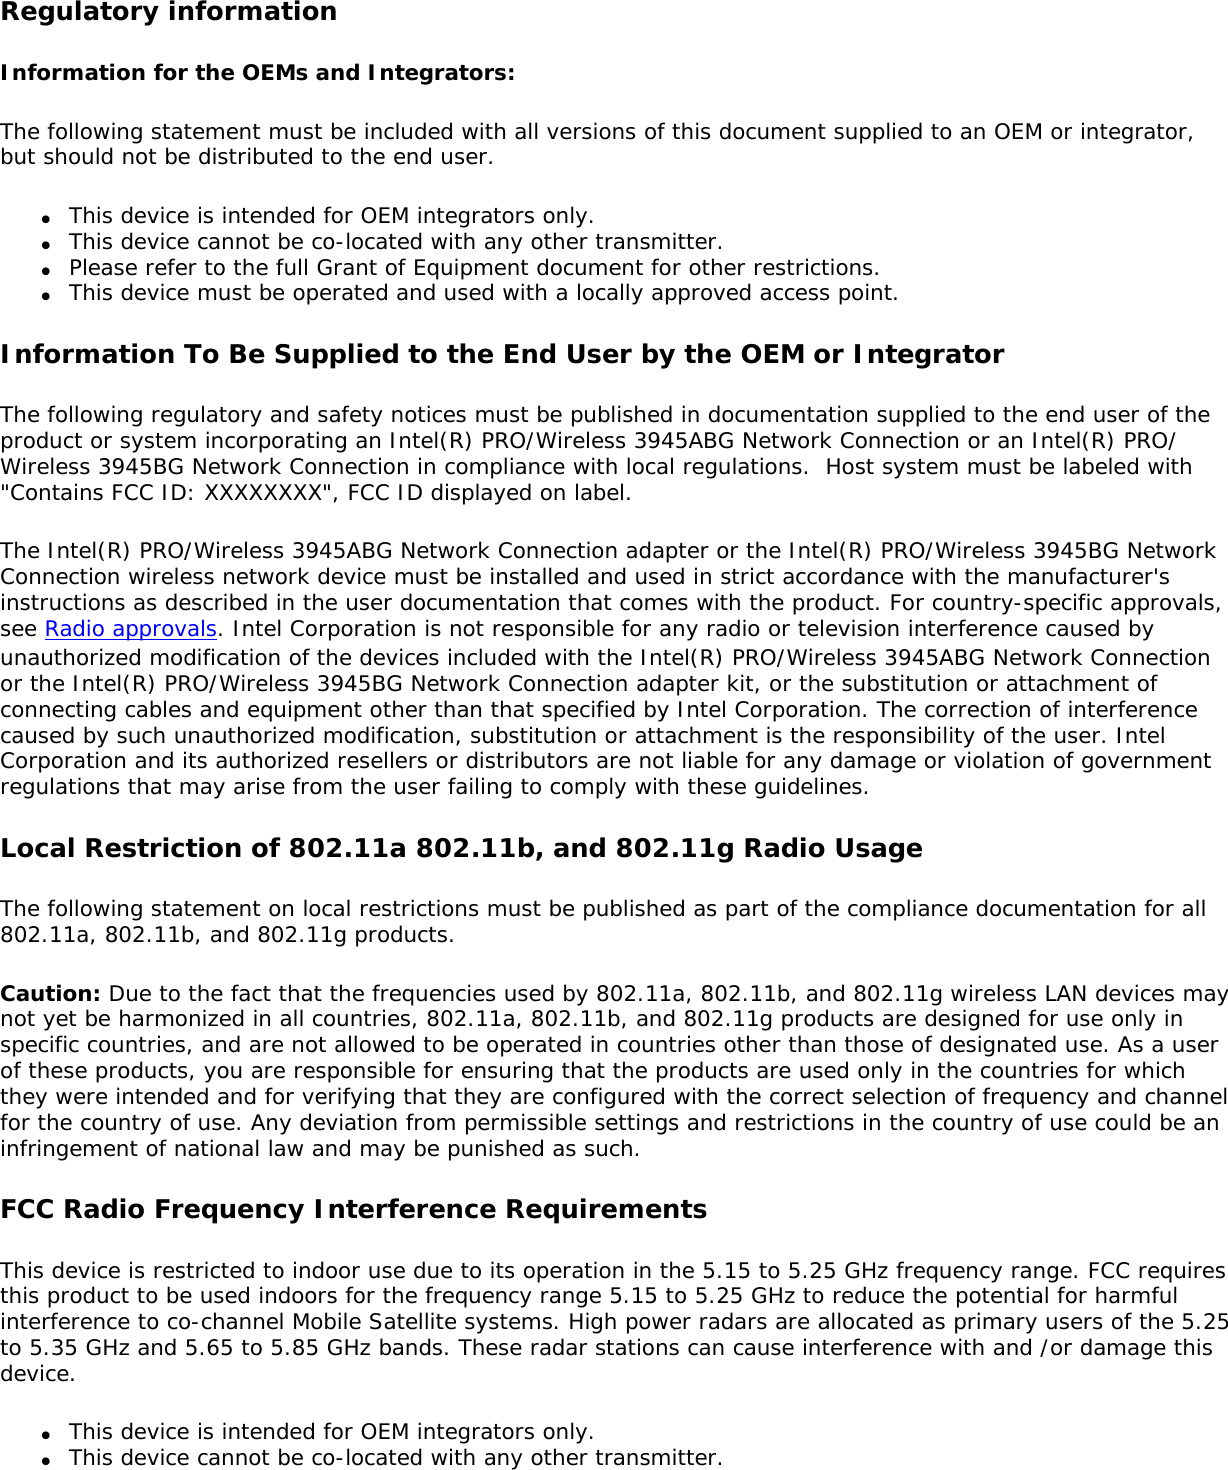 Regulatory informationInformation for the OEMs and Integrators:  The following statement must be included with all versions of this document supplied to an OEM or integrator, but should not be distributed to the end user. ●     This device is intended for OEM integrators only. ●     This device cannot be co-located with any other transmitter.●     Please refer to the full Grant of Equipment document for other restrictions.●     This device must be operated and used with a locally approved access point.Information To Be Supplied to the End User by the OEM or Integrator The following regulatory and safety notices must be published in documentation supplied to the end user of the product or system incorporating an Intel(R) PRO/Wireless 3945ABG Network Connection or an Intel(R) PRO/Wireless 3945BG Network Connection in compliance with local regulations.  Host system must be labeled with &quot;Contains FCC ID: XXXXXXXX&quot;, FCC ID displayed on label. The Intel(R) PRO/Wireless 3945ABG Network Connection adapter or the Intel(R) PRO/Wireless 3945BG Network Connection wireless network device must be installed and used in strict accordance with the manufacturer&apos;s instructions as described in the user documentation that comes with the product. For country-specific approvals, see Radio approvals. Intel Corporation is not responsible for any radio or television interference caused by unauthorized modification of the devices included with the Intel(R) PRO/Wireless 3945ABG Network Connection or the Intel(R) PRO/Wireless 3945BG Network Connection adapter kit, or the substitution or attachment of connecting cables and equipment other than that specified by Intel Corporation. The correction of interference caused by such unauthorized modification, substitution or attachment is the responsibility of the user. Intel Corporation and its authorized resellers or distributors are not liable for any damage or violation of government regulations that may arise from the user failing to comply with these guidelines. Local Restriction of 802.11a 802.11b, and 802.11g Radio Usage The following statement on local restrictions must be published as part of the compliance documentation for all 802.11a, 802.11b, and 802.11g products. Caution: Due to the fact that the frequencies used by 802.11a, 802.11b, and 802.11g wireless LAN devices may not yet be harmonized in all countries, 802.11a, 802.11b, and 802.11g products are designed for use only in specific countries, and are not allowed to be operated in countries other than those of designated use. As a user of these products, you are responsible for ensuring that the products are used only in the countries for which they were intended and for verifying that they are configured with the correct selection of frequency and channel for the country of use. Any deviation from permissible settings and restrictions in the country of use could be an infringement of national law and may be punished as such. FCC Radio Frequency Interference Requirements This device is restricted to indoor use due to its operation in the 5.15 to 5.25 GHz frequency range. FCC requires this product to be used indoors for the frequency range 5.15 to 5.25 GHz to reduce the potential for harmful interference to co-channel Mobile Satellite systems. High power radars are allocated as primary users of the 5.25 to 5.35 GHz and 5.65 to 5.85 GHz bands. These radar stations can cause interference with and /or damage this device. ●     This device is intended for OEM integrators only.●     This device cannot be co-located with any other transmitter. 